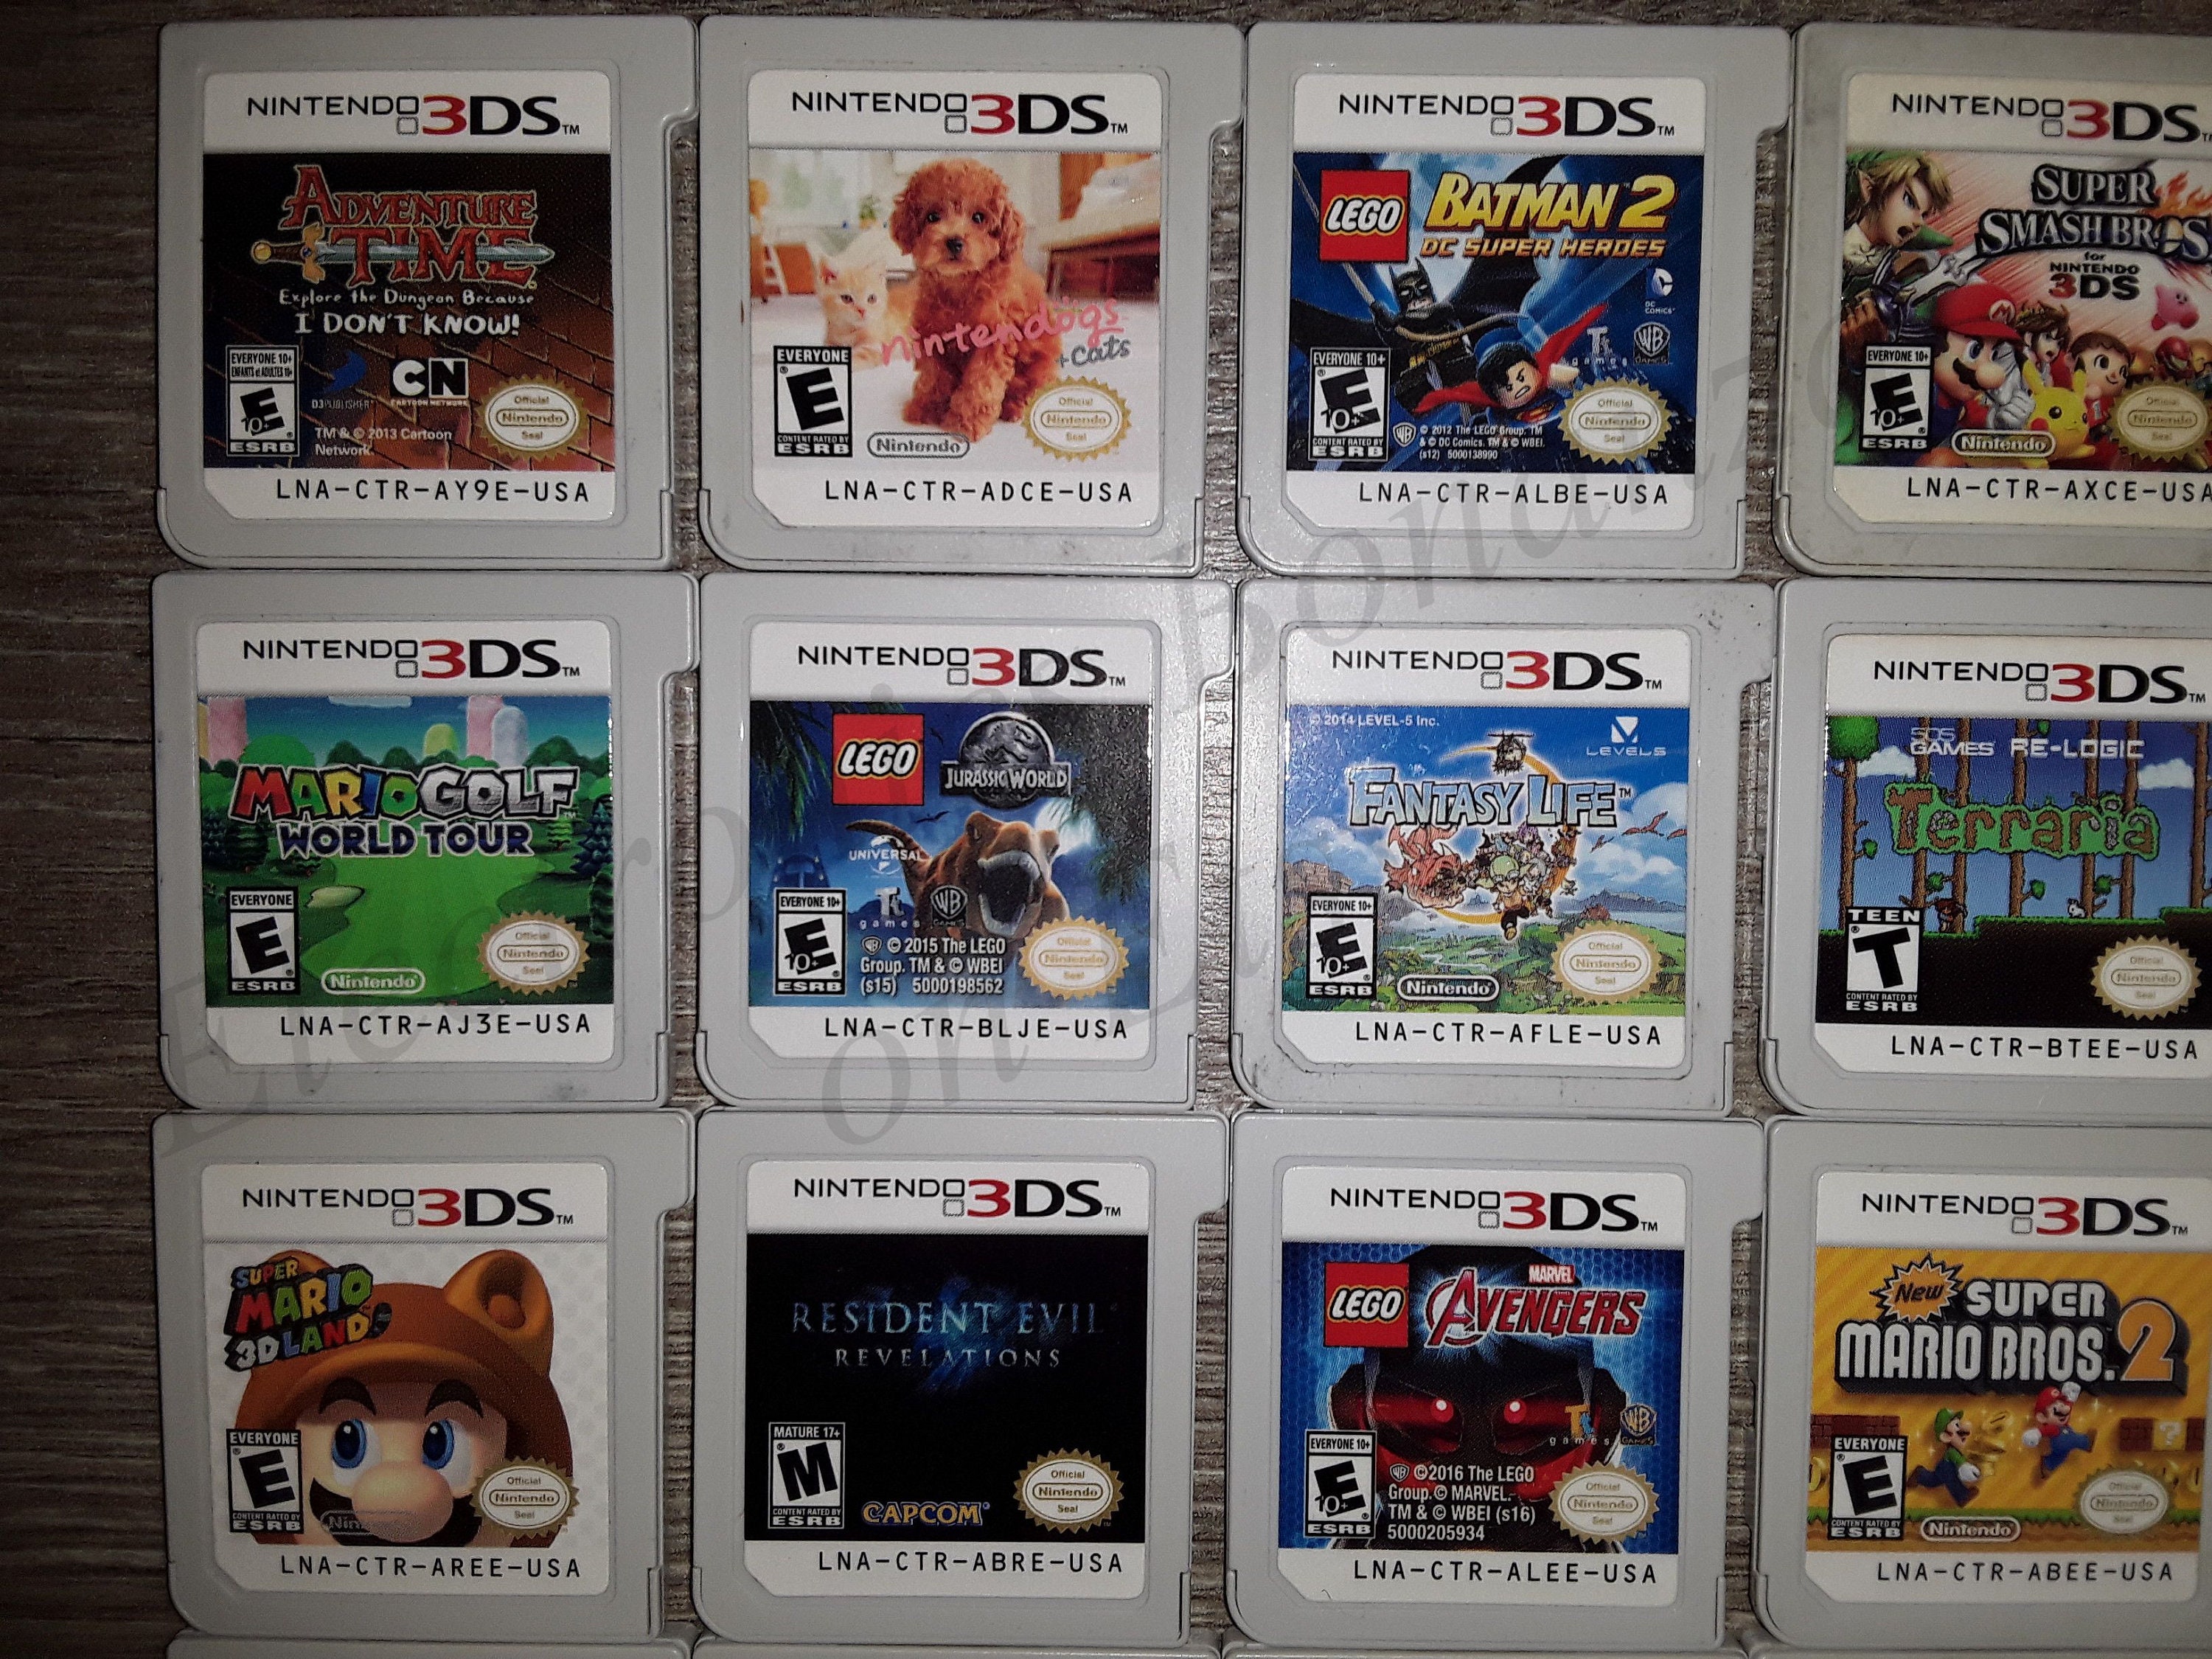 Nintendo 3DS game deals, freebies, and eShop exclusives - 9to5Toys